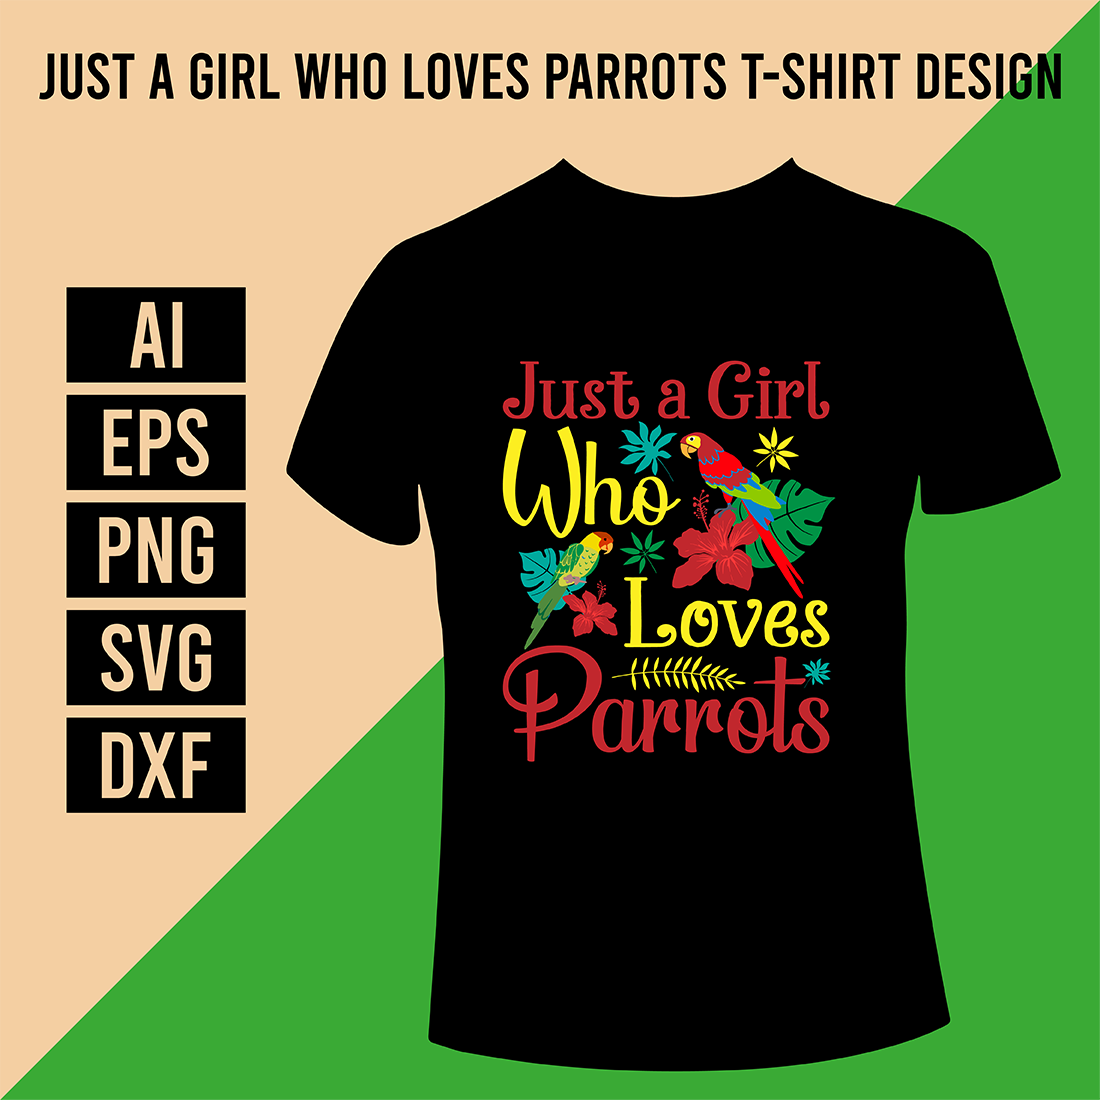 Just a Girl Who Loves Parrots T-Shirt Design cover image.